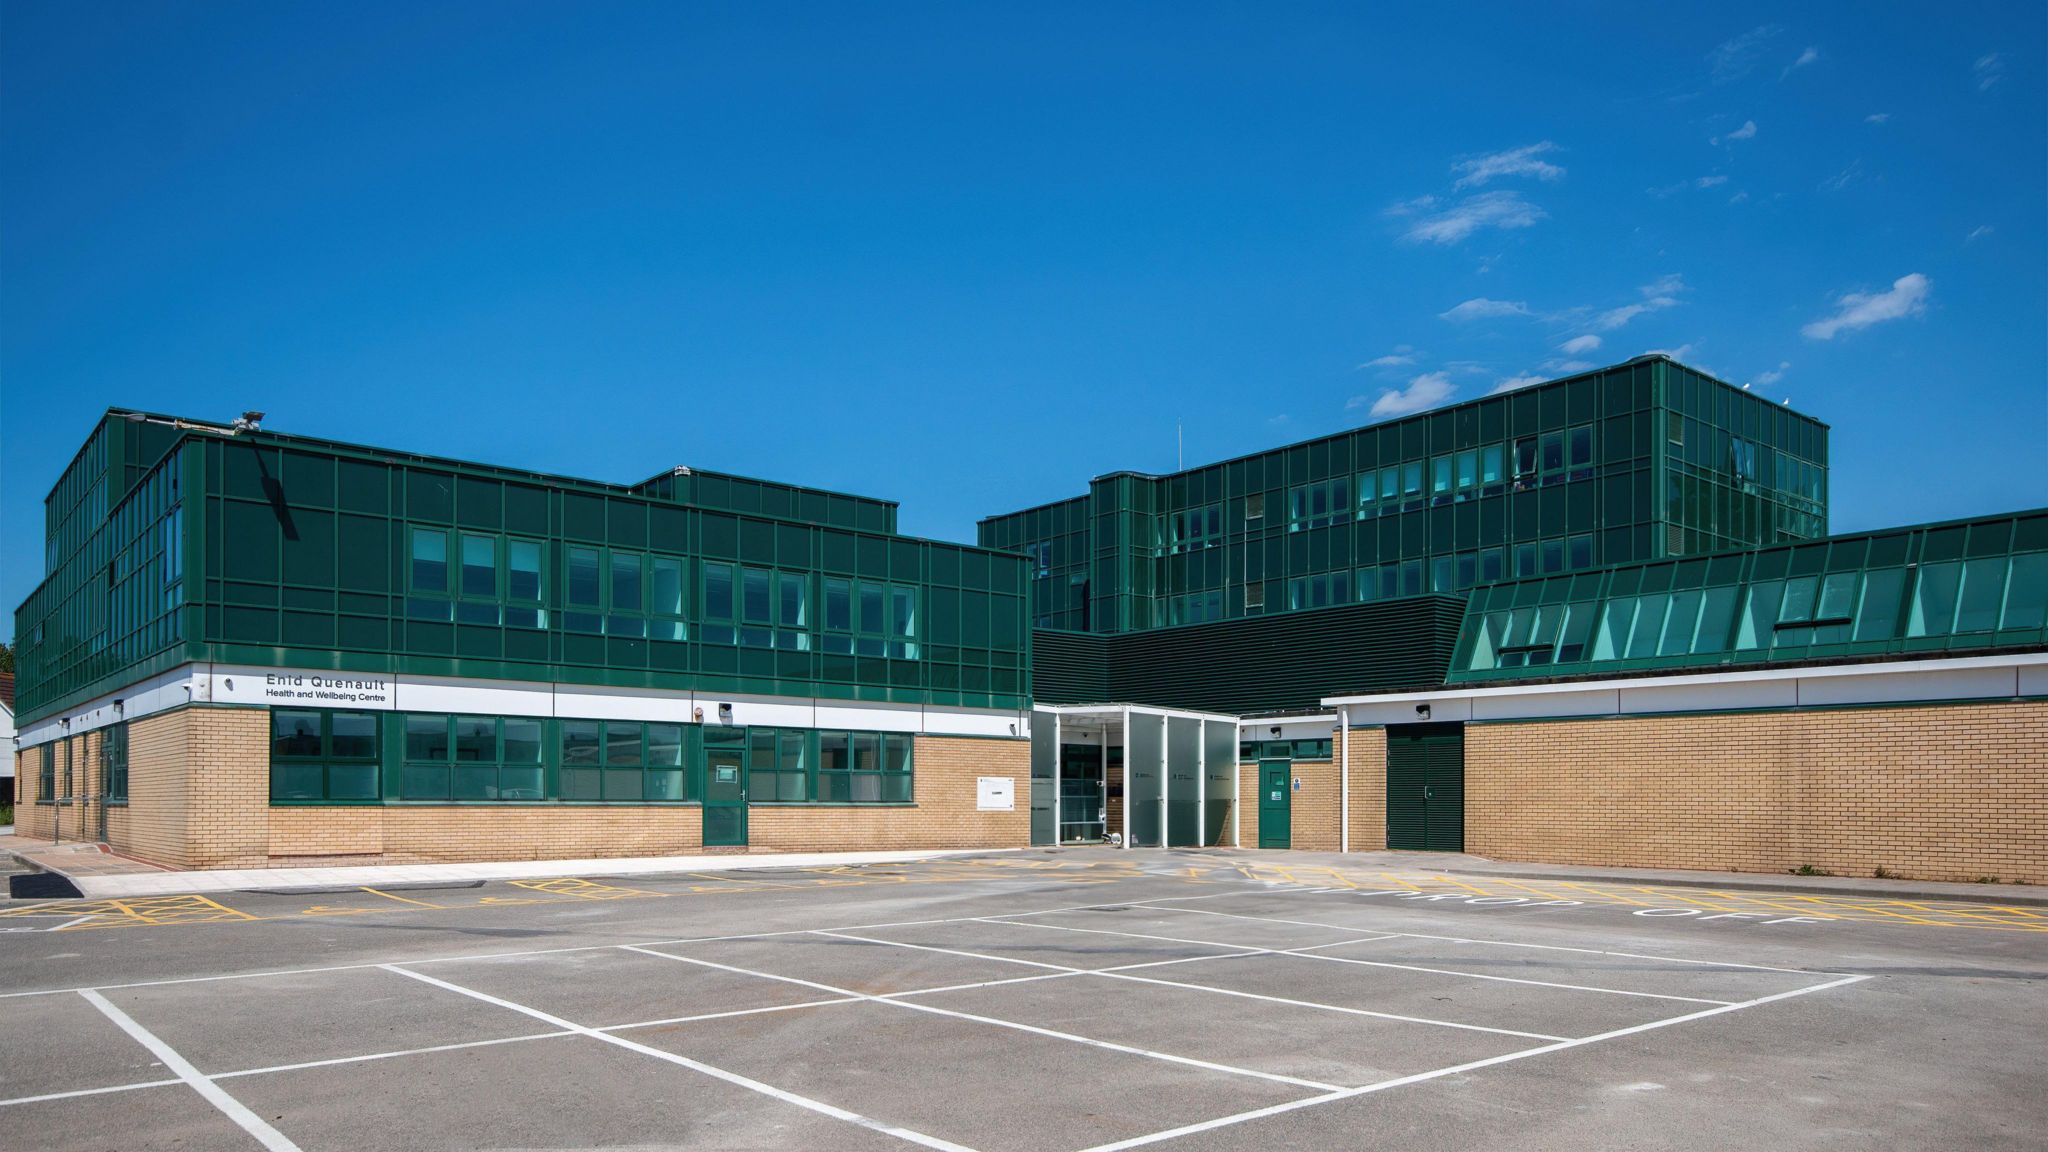 The Enid Quenault Health and Wellbeing Centre in Jersey